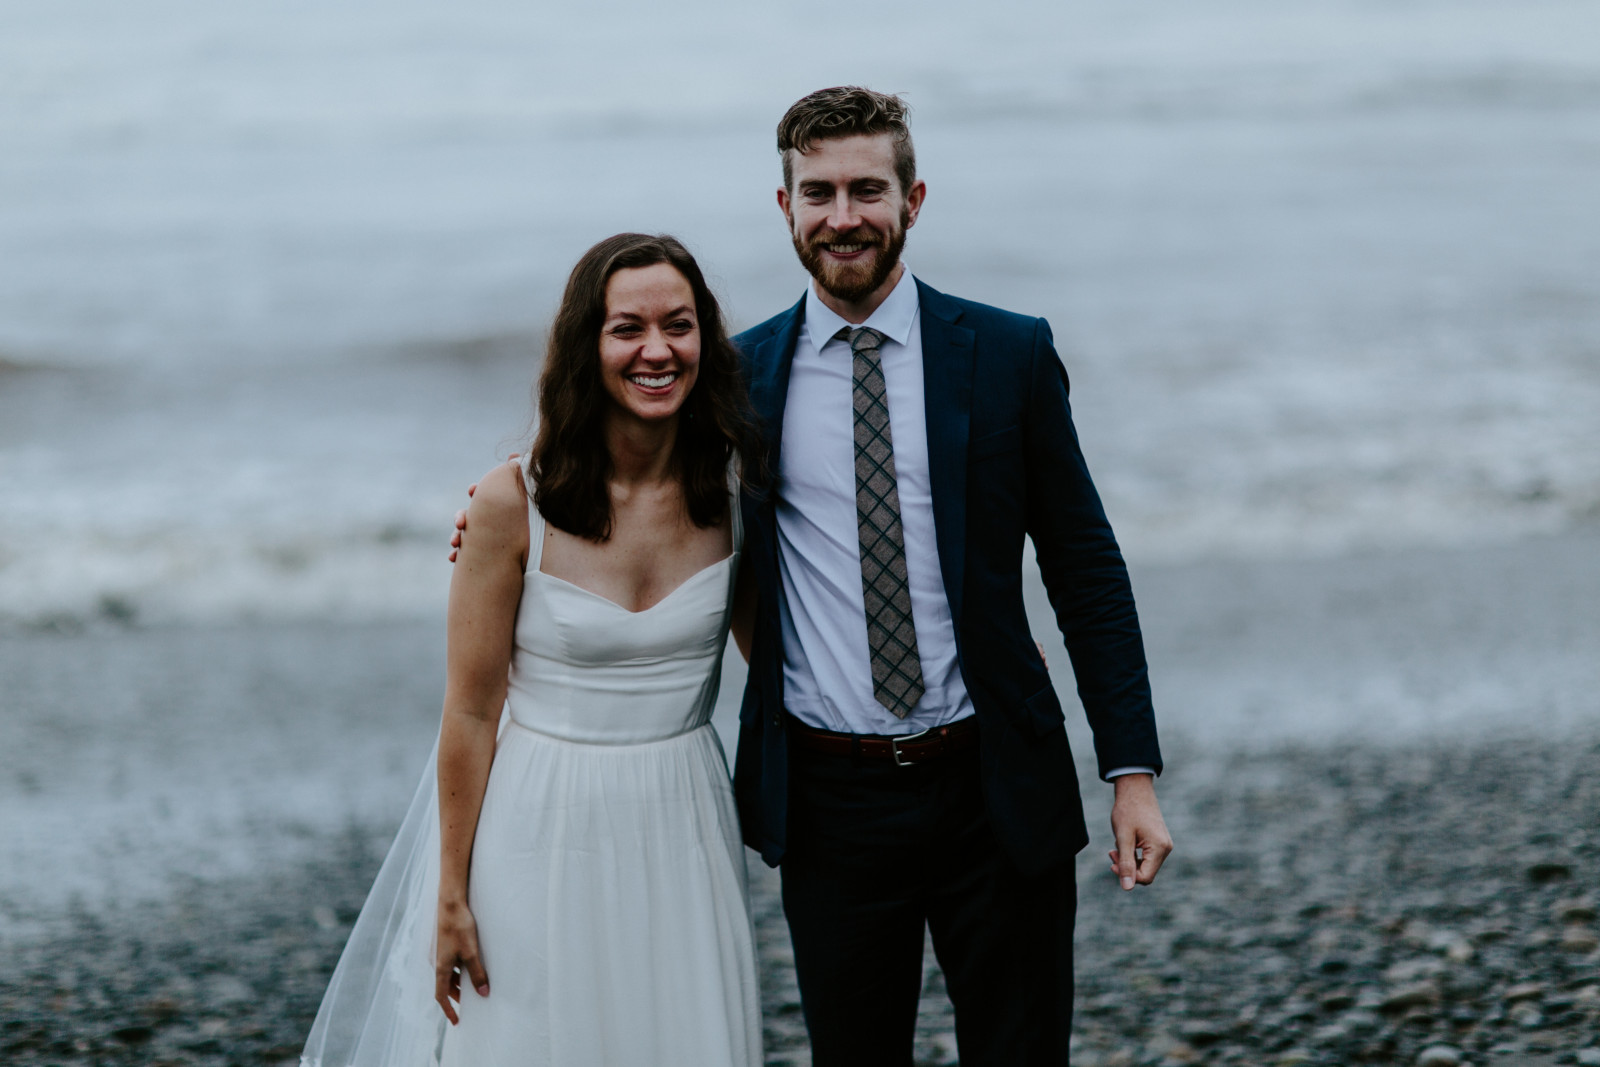 Mollie and Corey smile after eloping. Elopement photography at Olympic National Park by Sienna Plus Josh.